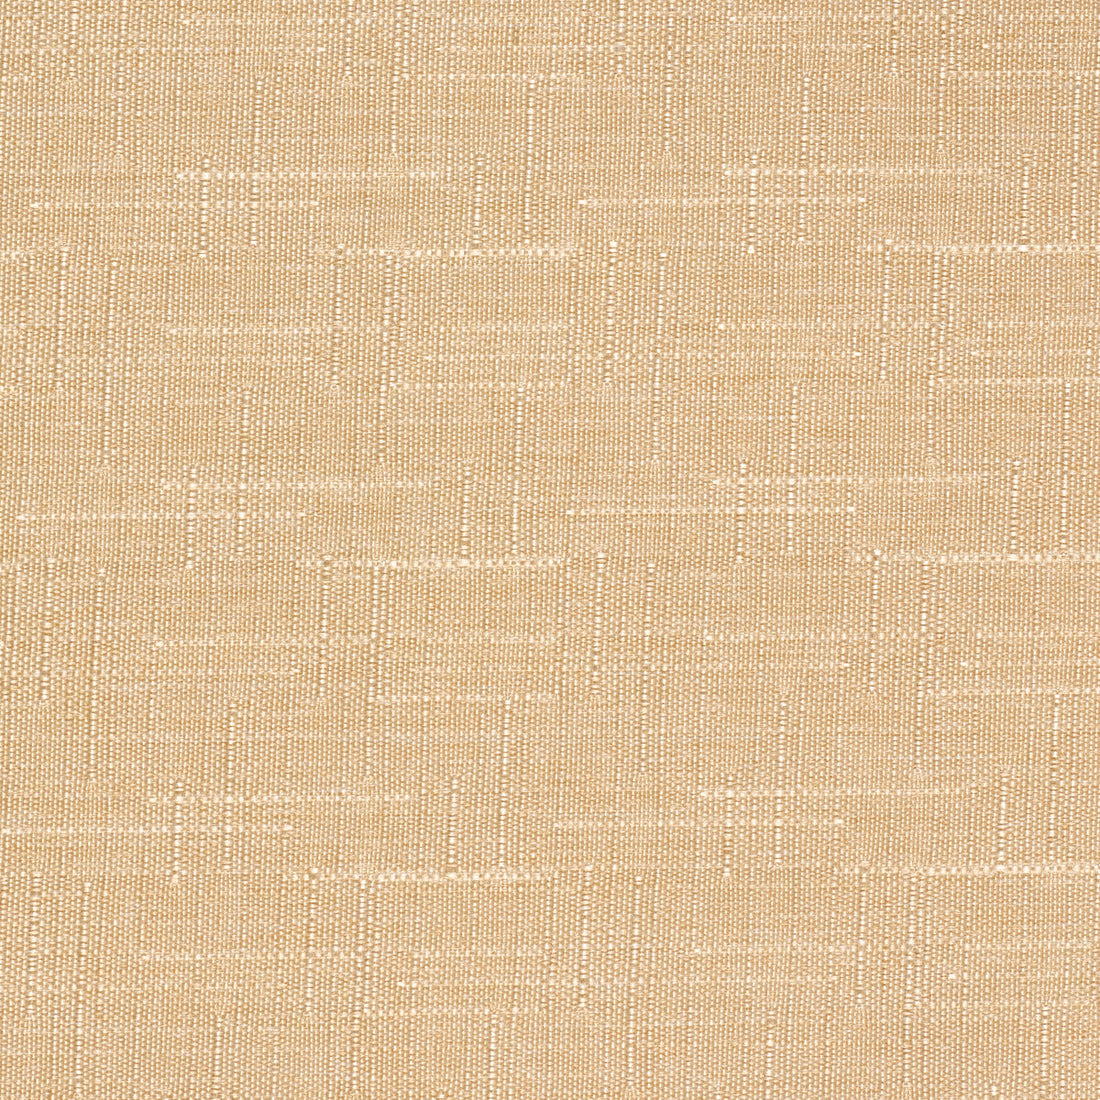 Kravet Contract fabric in 4317-116 color - pattern 4317.116.0 - by Kravet Contract